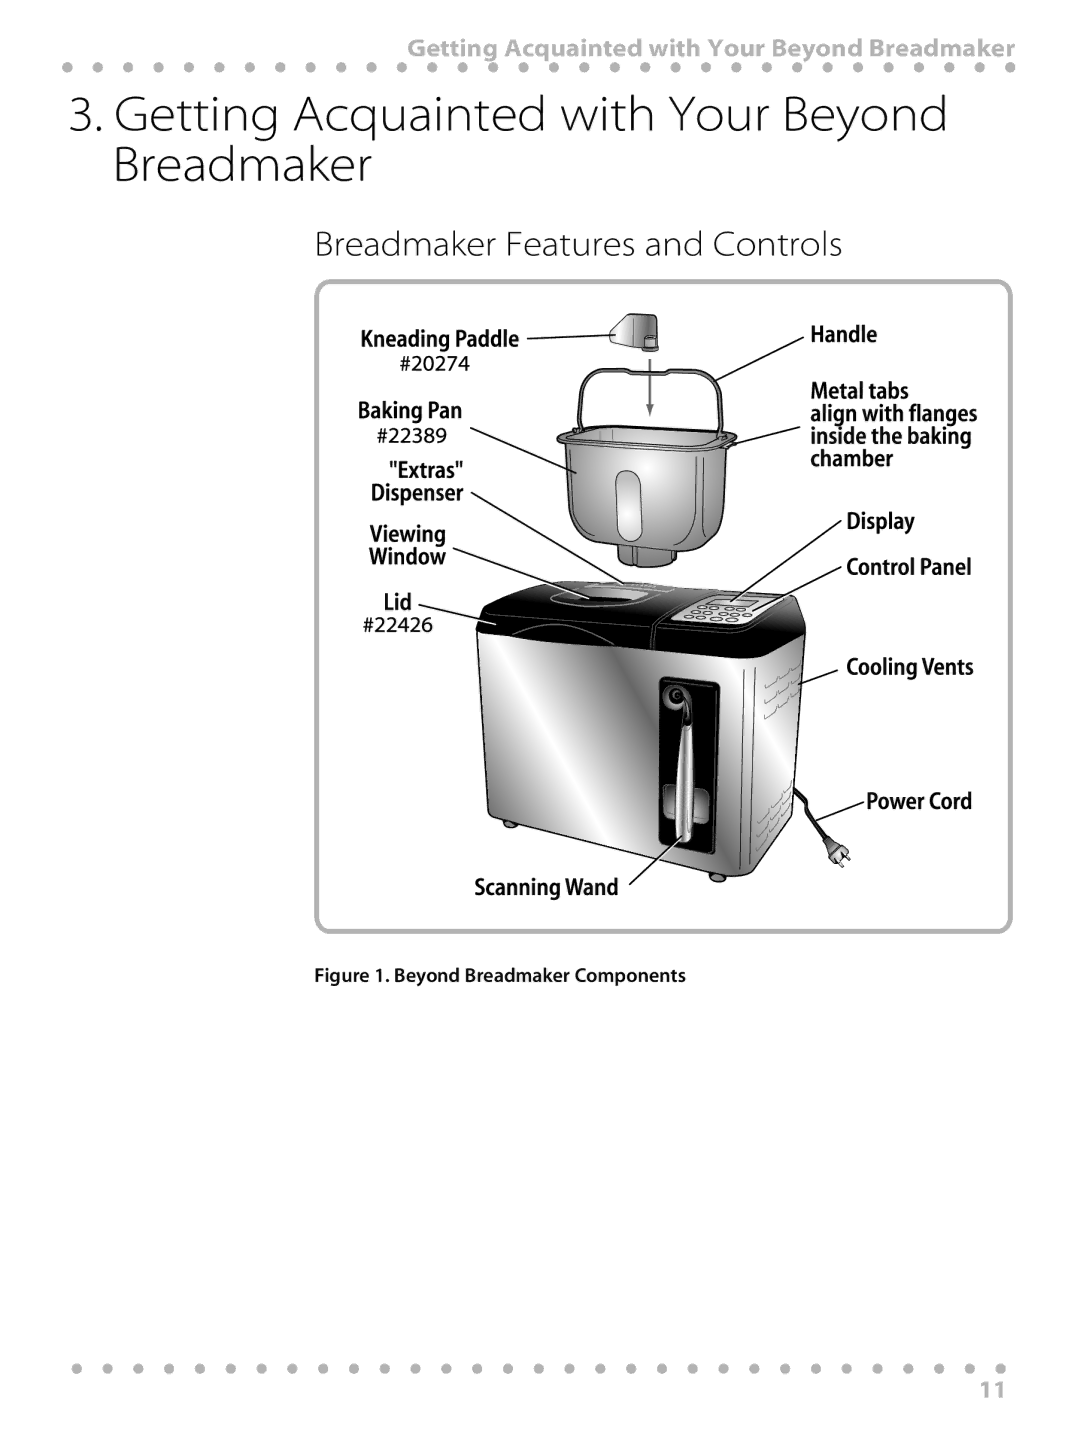 Toastmaster WBYBM1 manual Getting Acquainted with Your Beyond Breadmaker, Breadmaker Features and Controls 